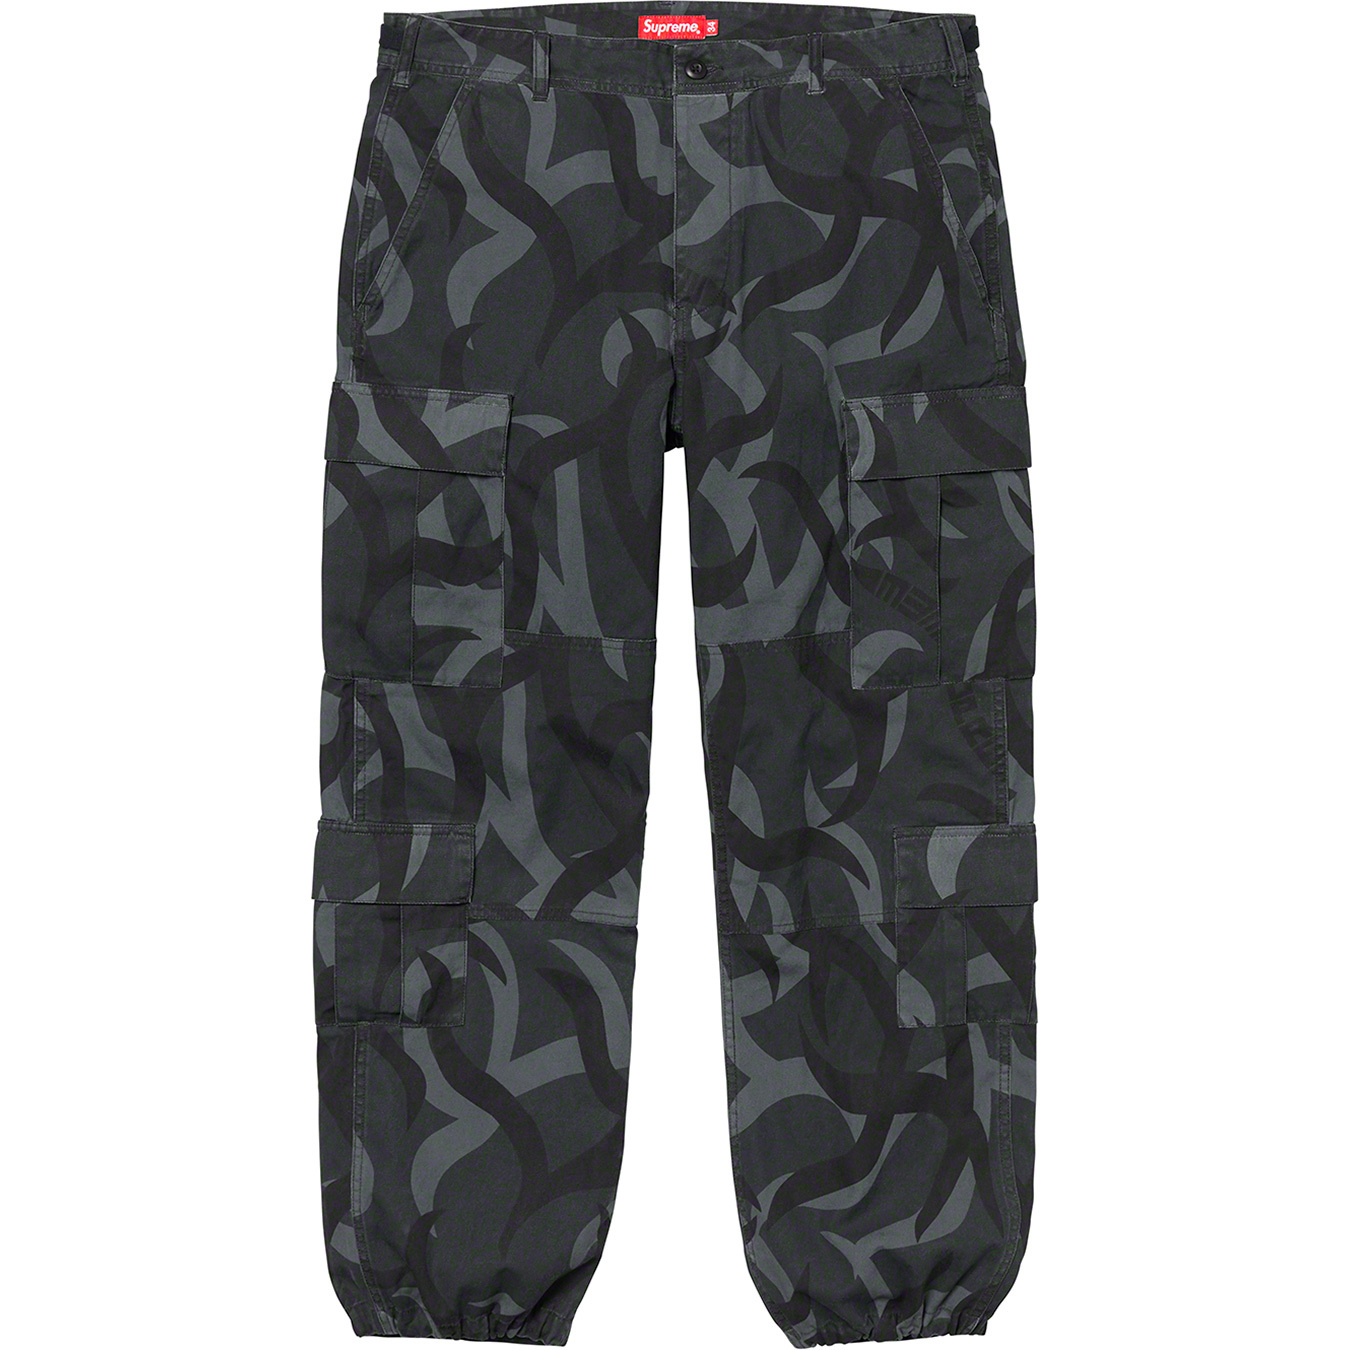 Supreme 2019 Fall Winter Tribal Cargo Pants Size 30 New With Tags Hard to  Find